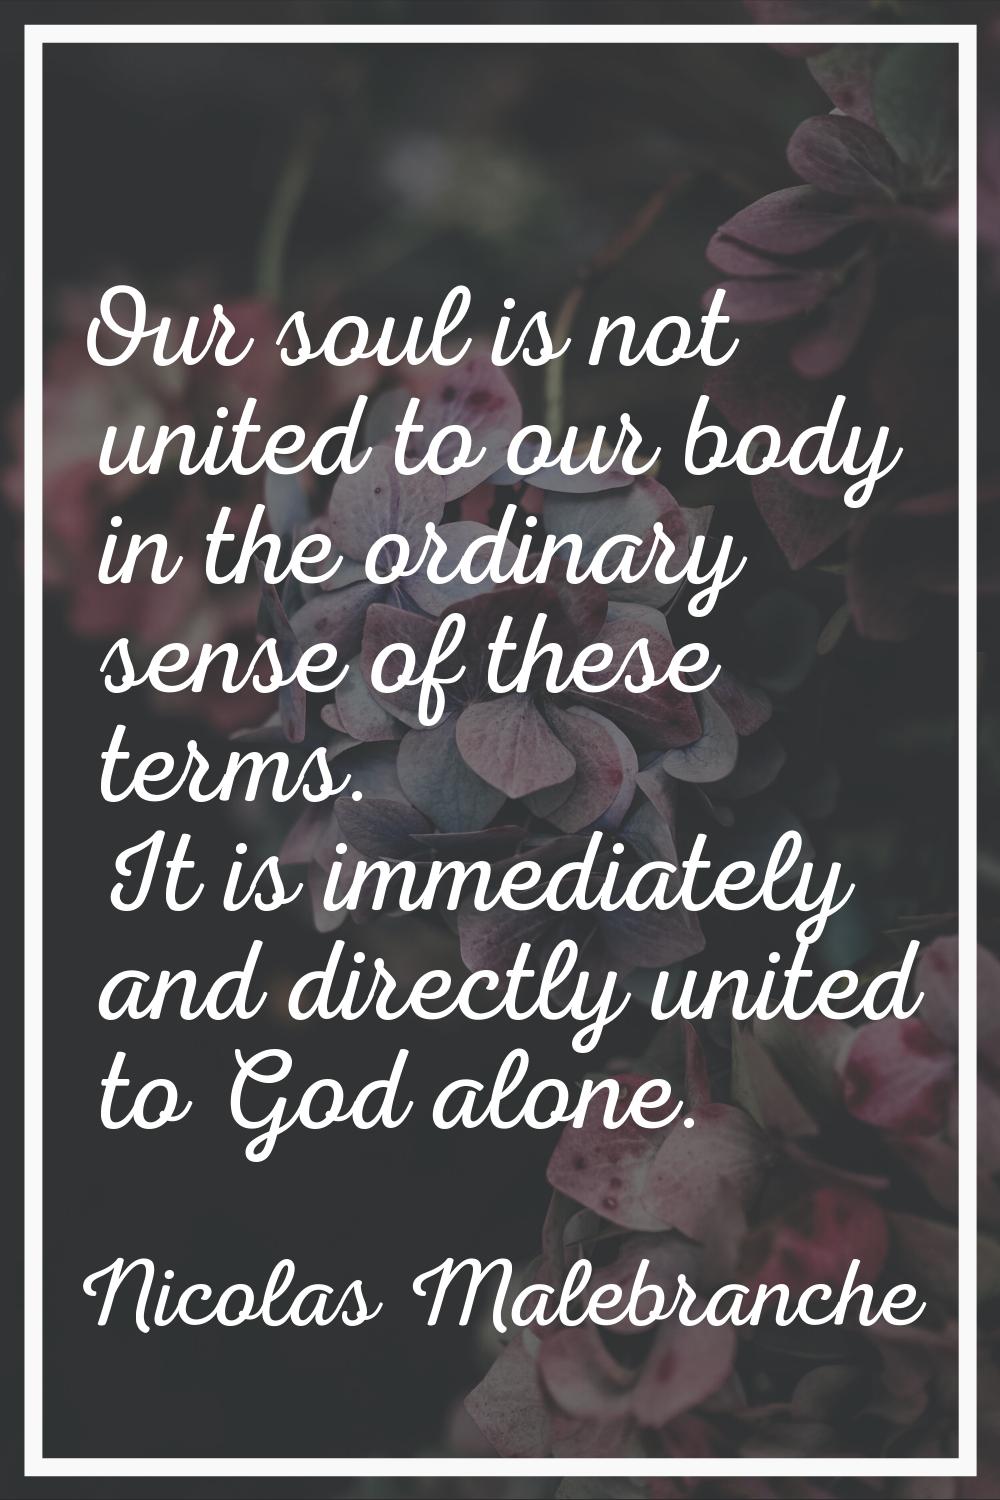 Our soul is not united to our body in the ordinary sense of these terms. It is immediately and dire